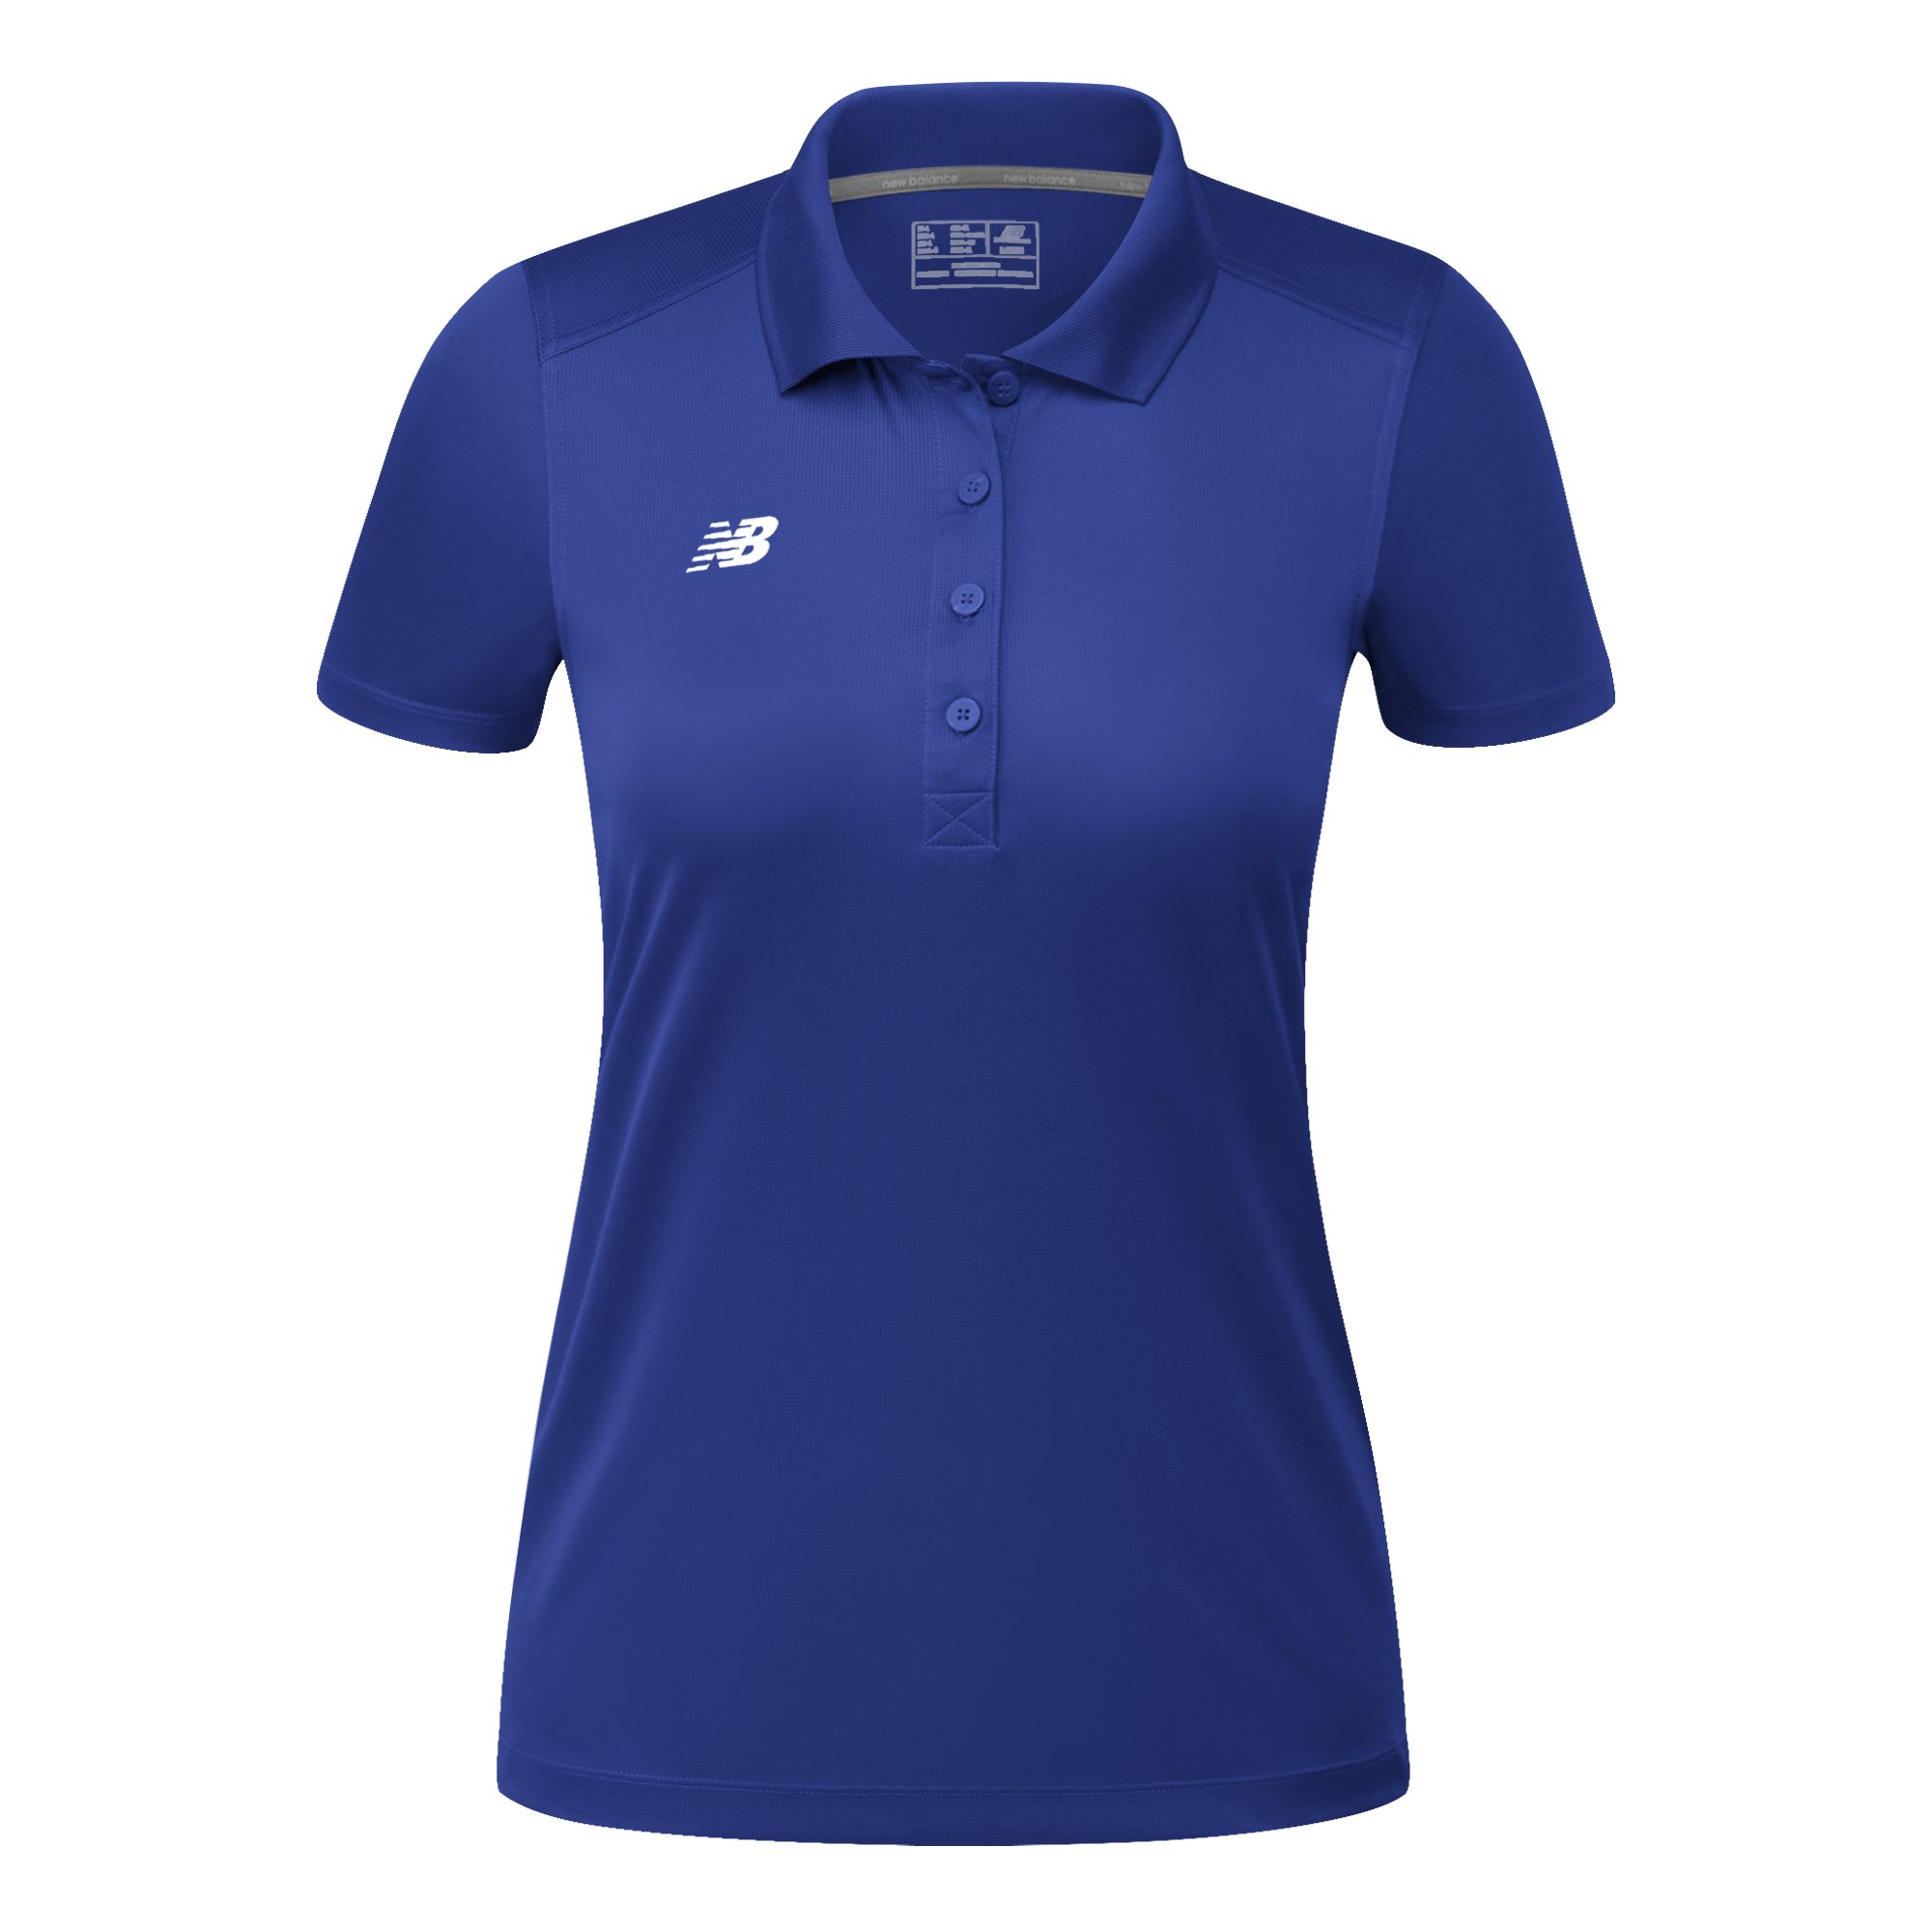 Women's Tech Polo, Team Royal image number 0